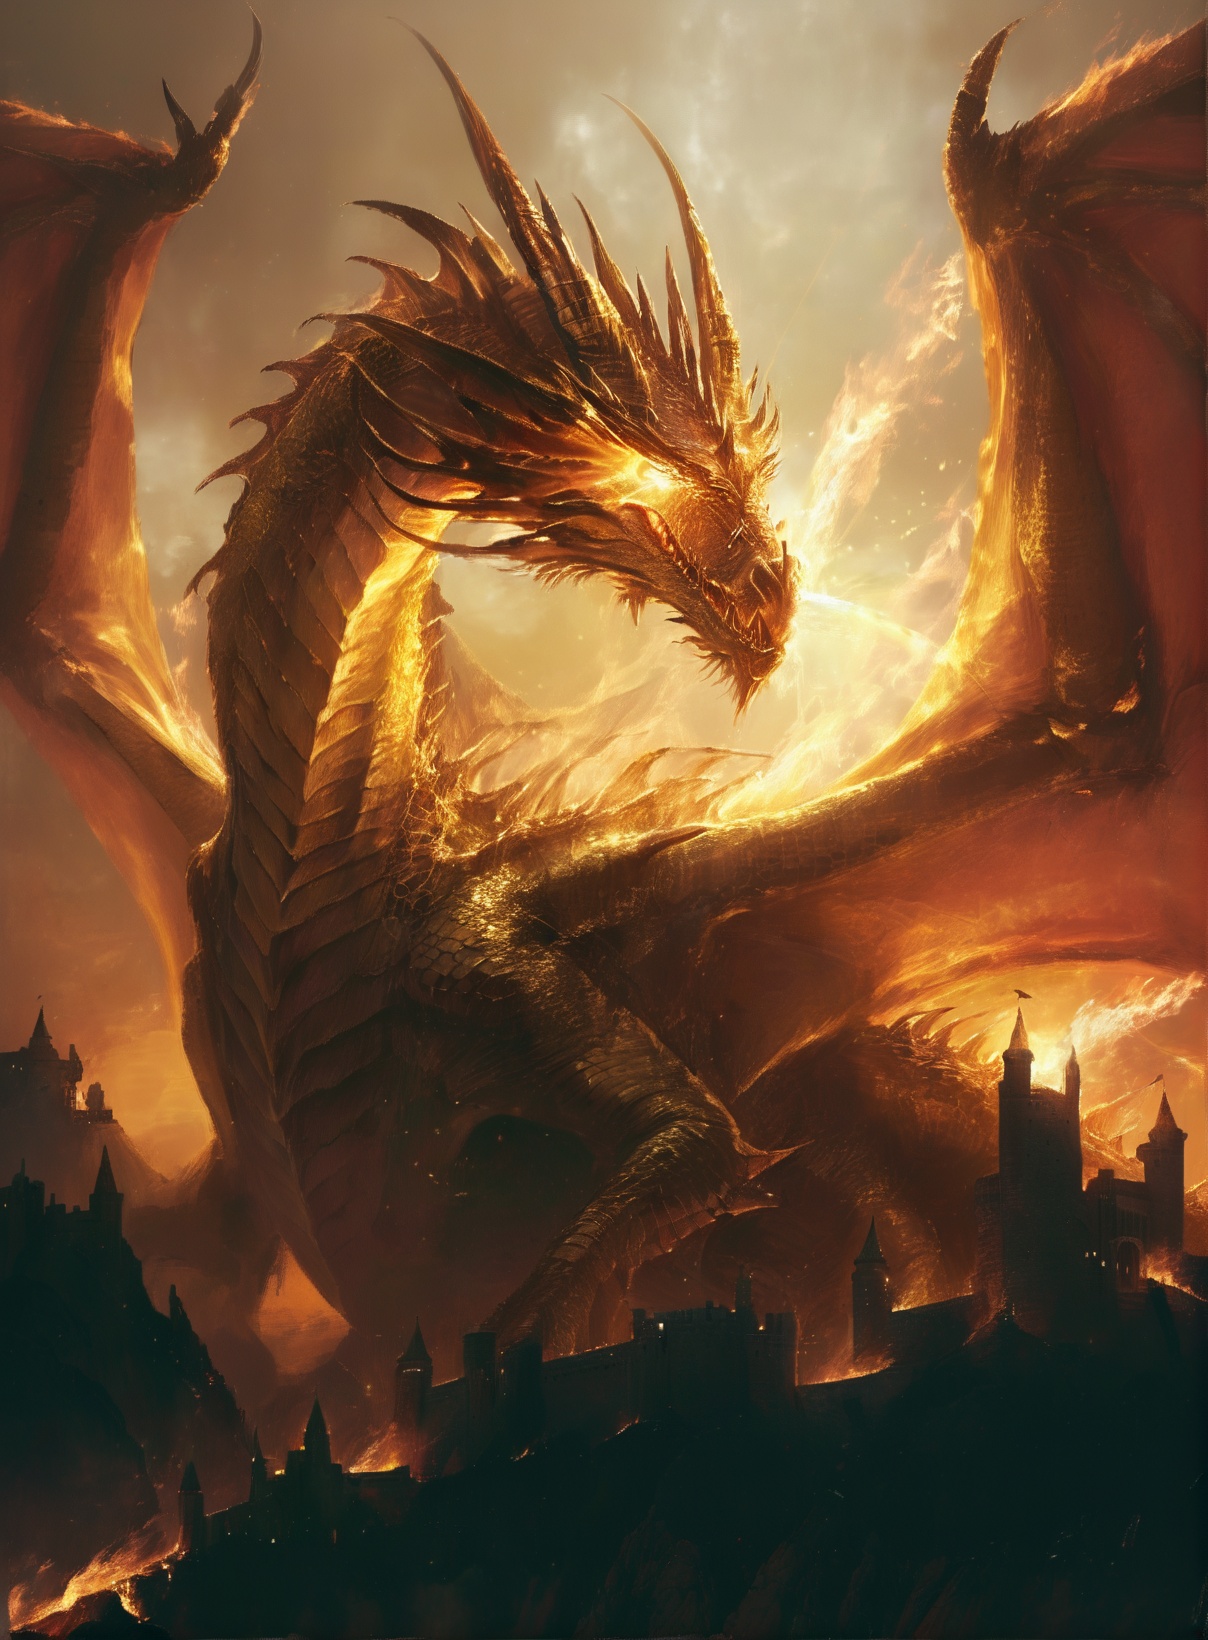 a majestic dragon with glowing orange eyes, emerging from a fiery backdrop. The dragon's scales are intricately detailed, showcasing a mix of gold and brown hues. Its wings are spread wide, and it seems to be hovering above a castle or fortress that is engulfed in flames. The castle is situated on a hill, surrounded by mountains, and is illuminated by the dragon's fiery breath. The sky is filled with dark clouds, adding to the dramatic and intense atmosphere of the scene<lora:KING Gardon-000010:1>